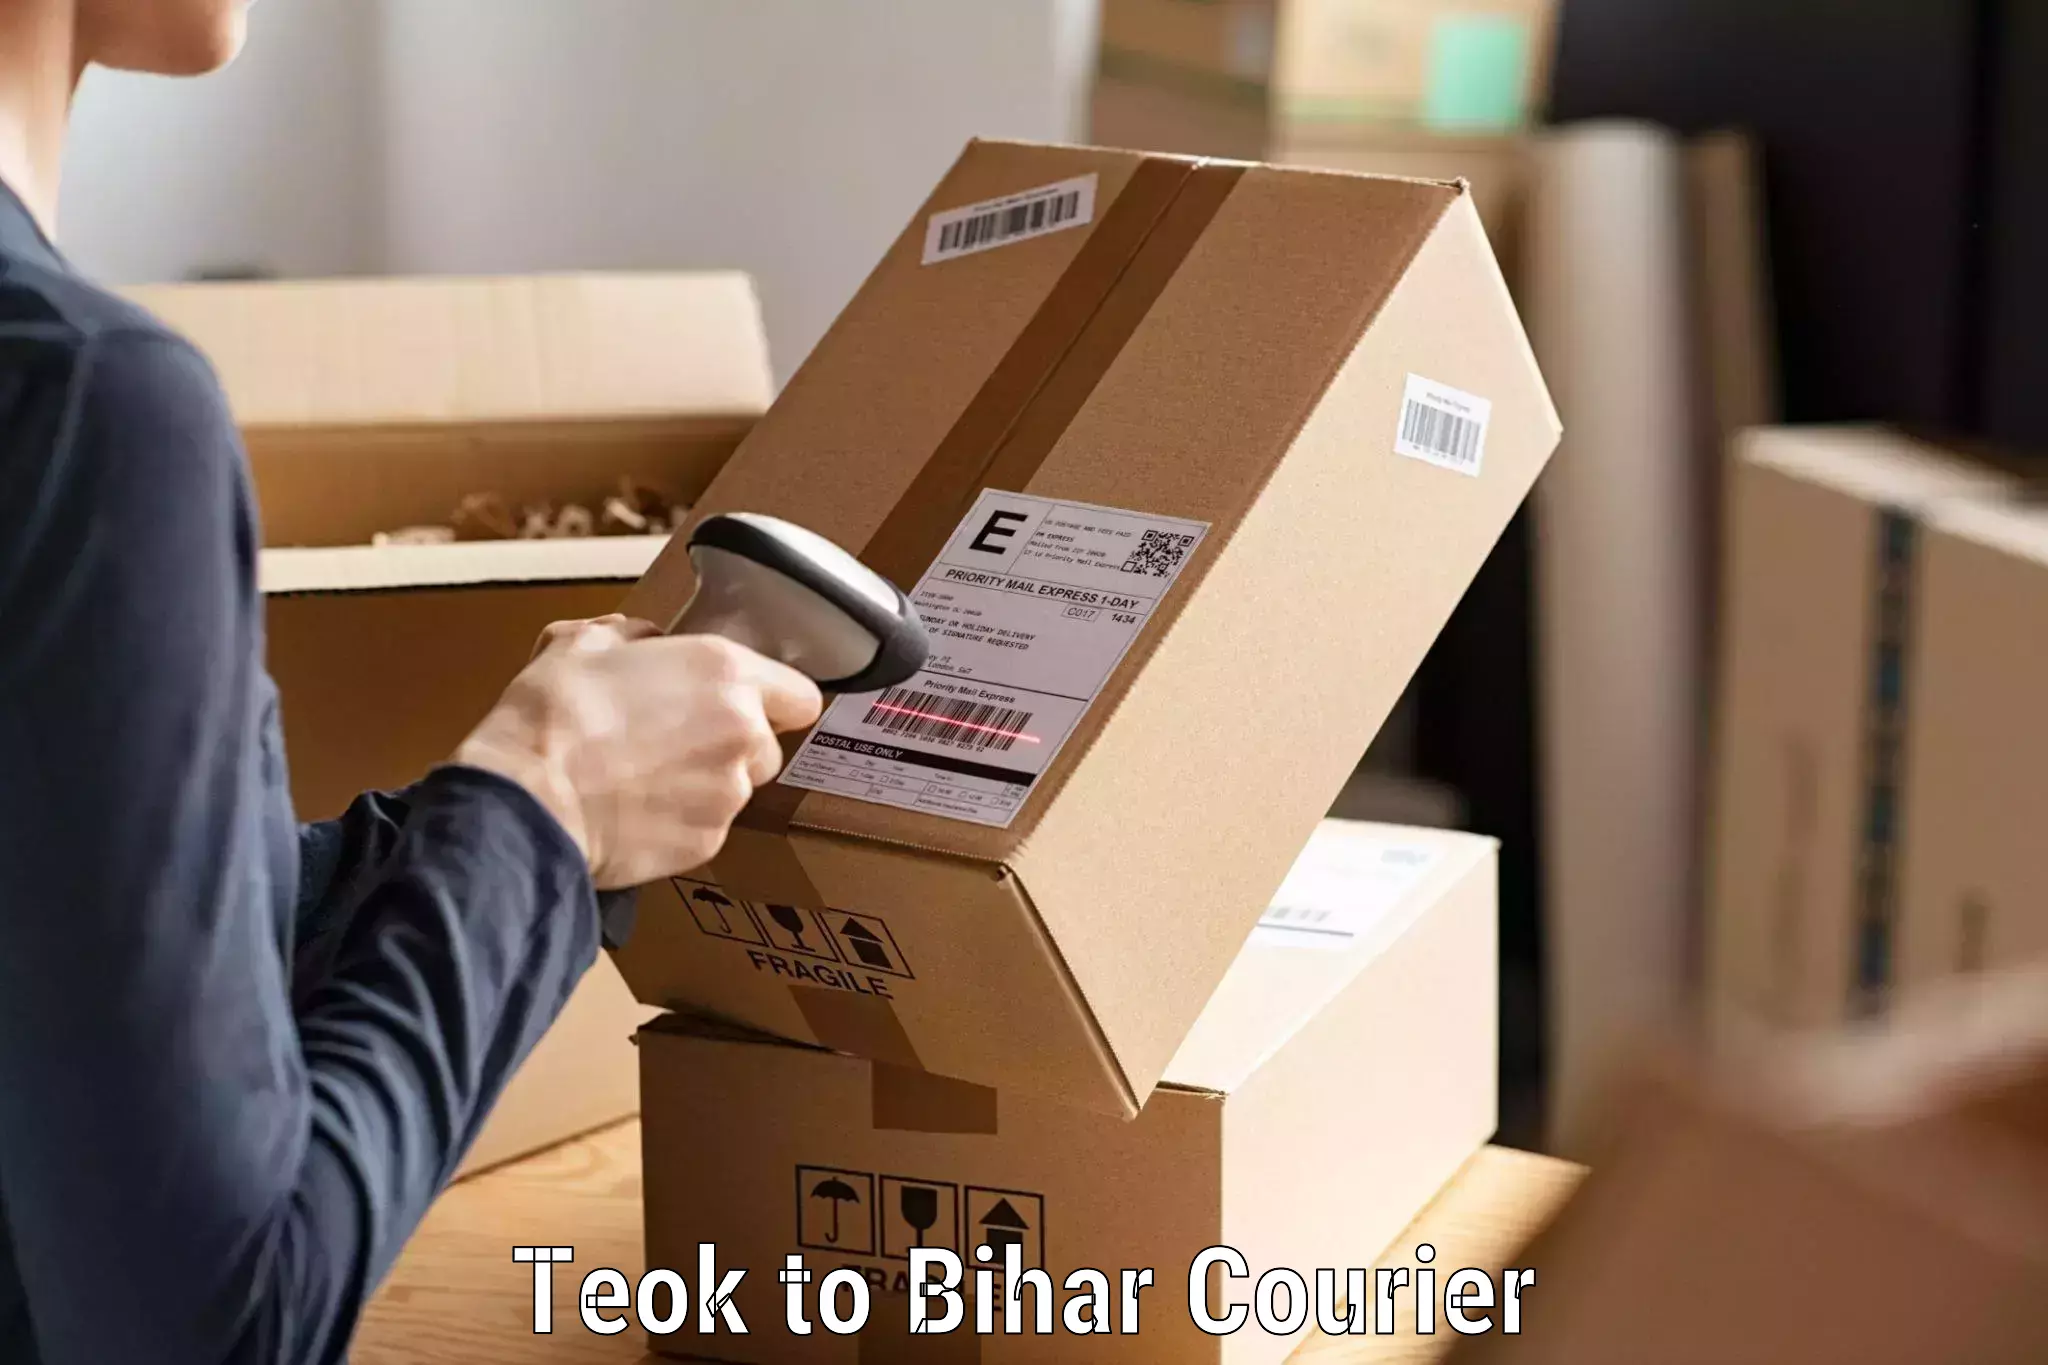 Quality courier services Teok to Bihar